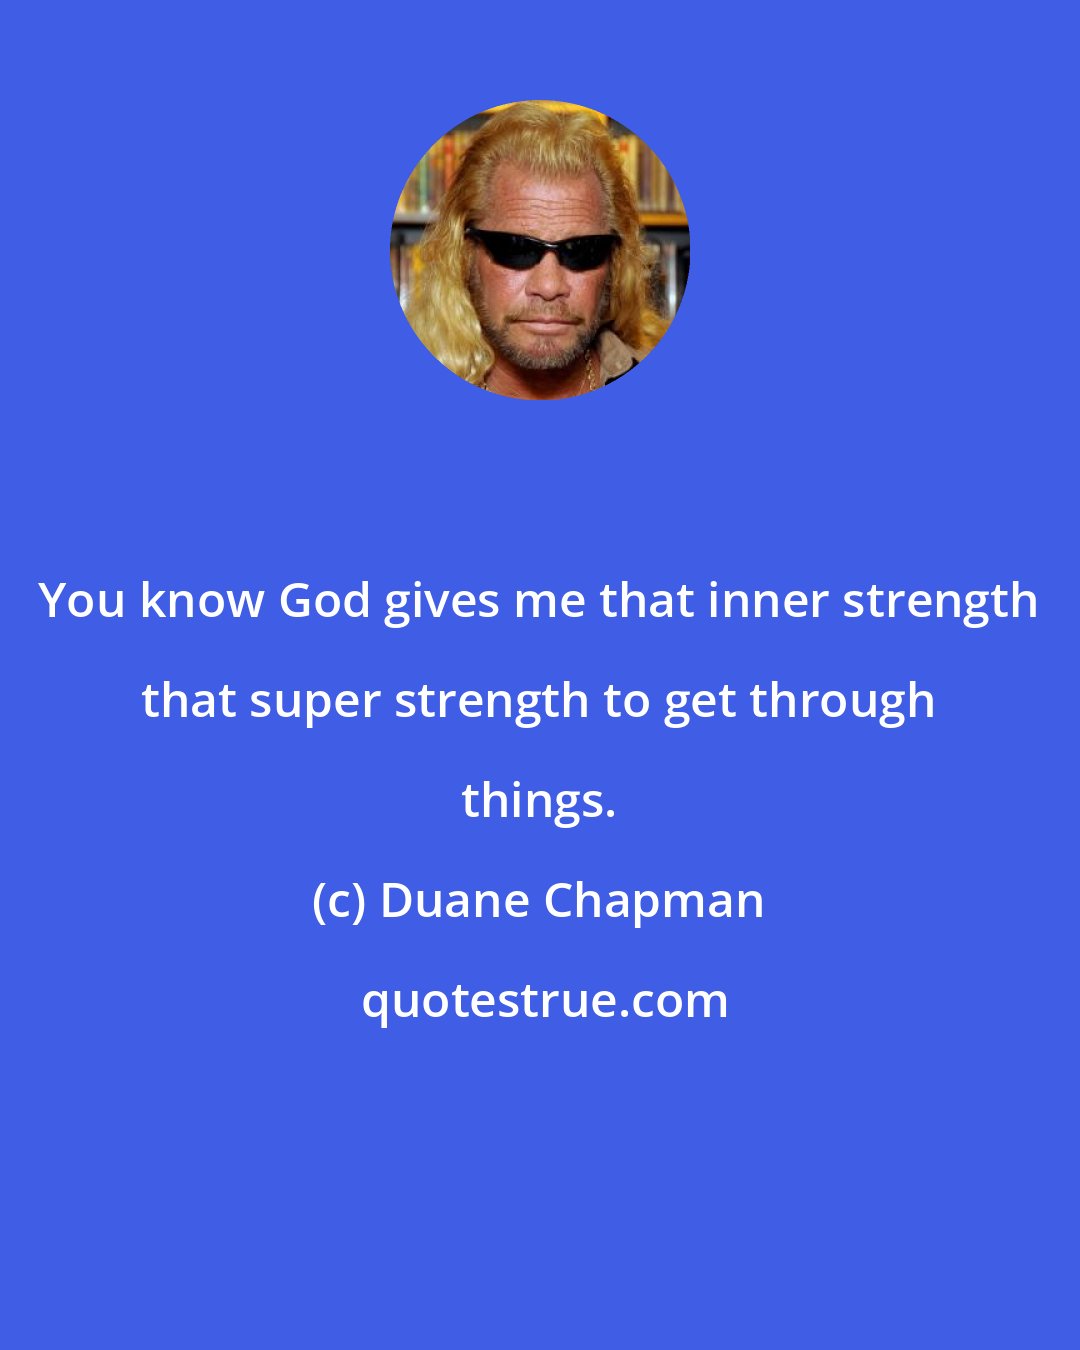 Duane Chapman: You know God gives me that inner strength that super strength to get through things.